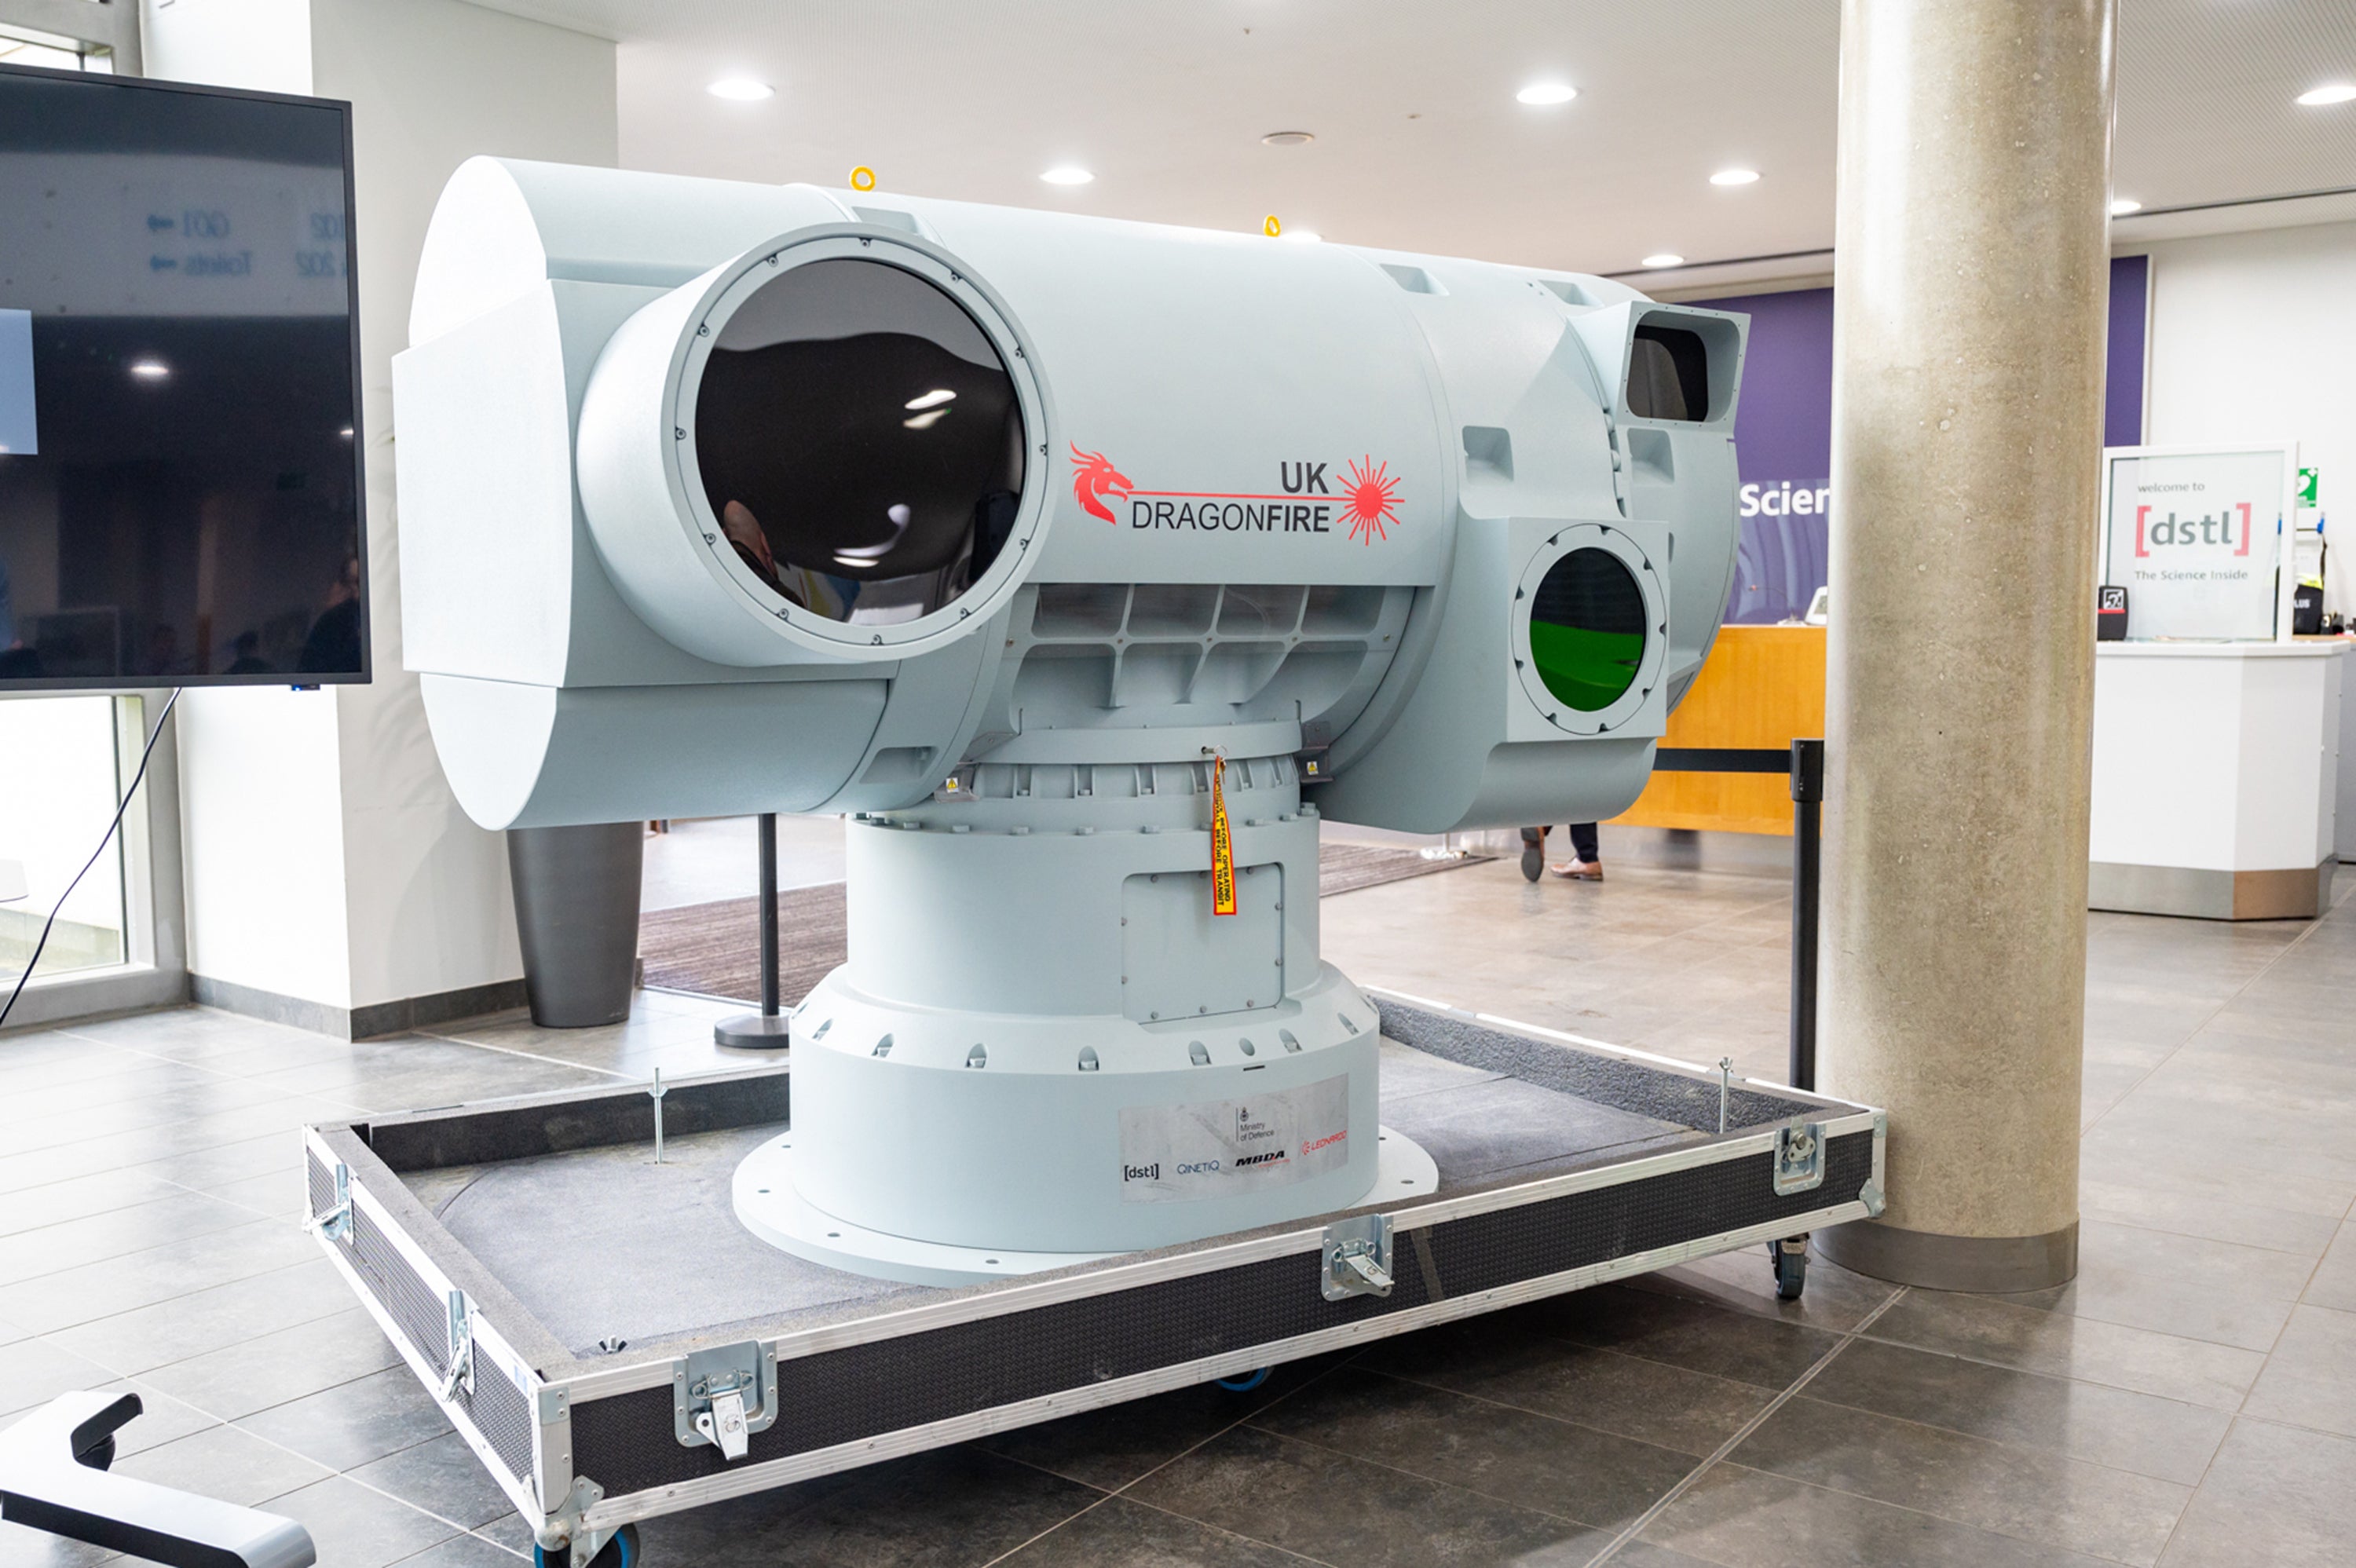 A ‘DragonFire’ British military laser weapon system